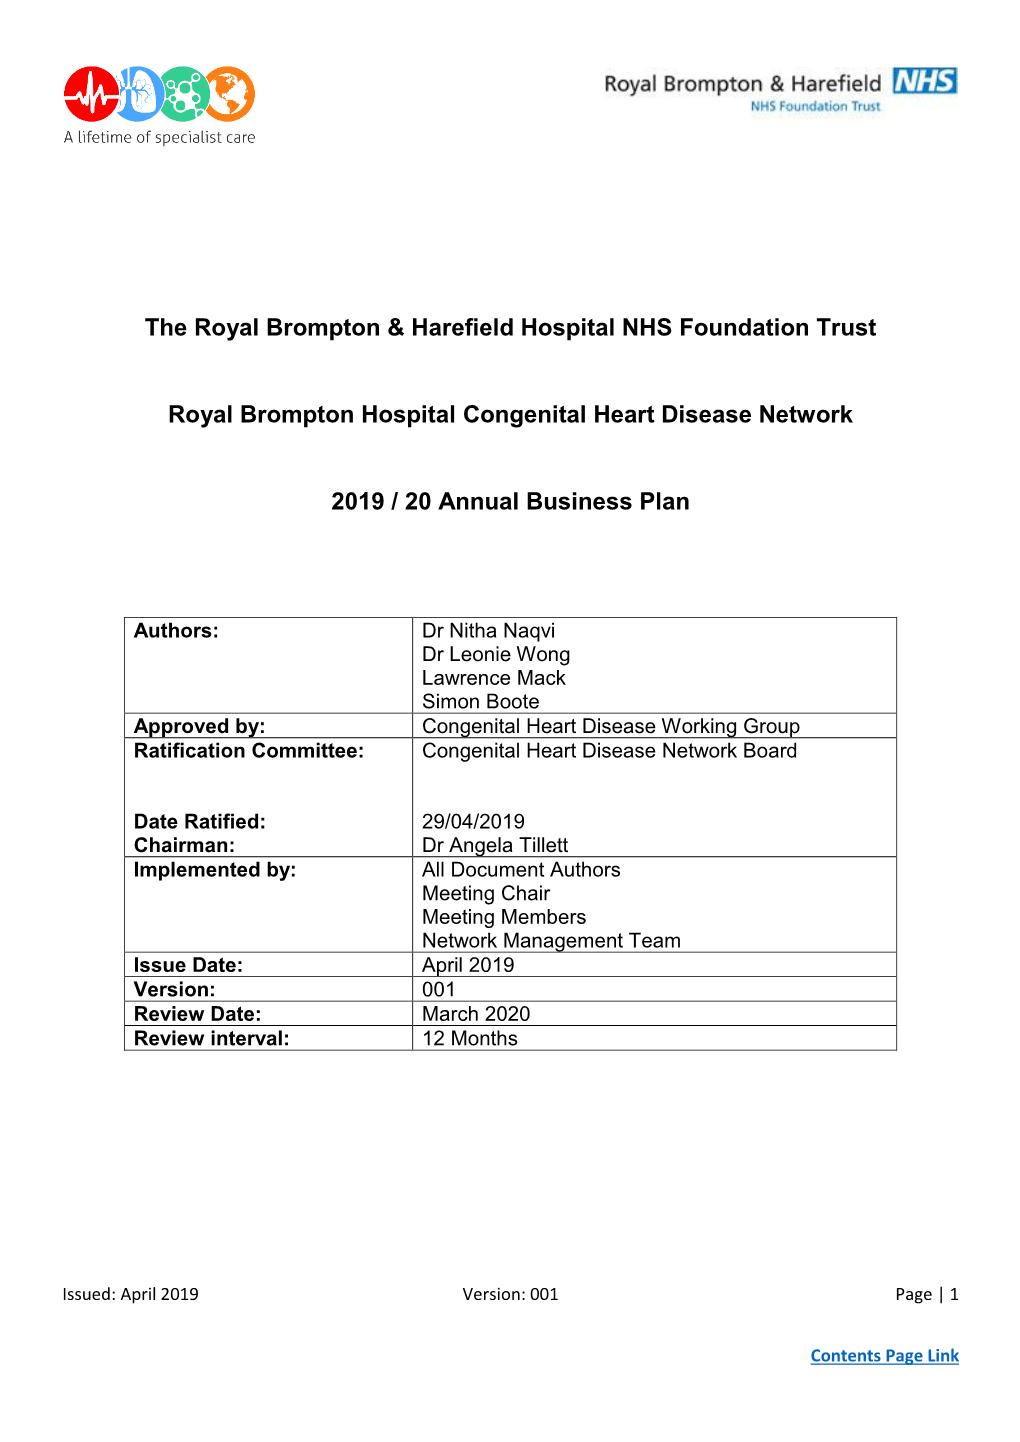 The Royal Brompton & Harefield Hospital NHS Foundation Trust